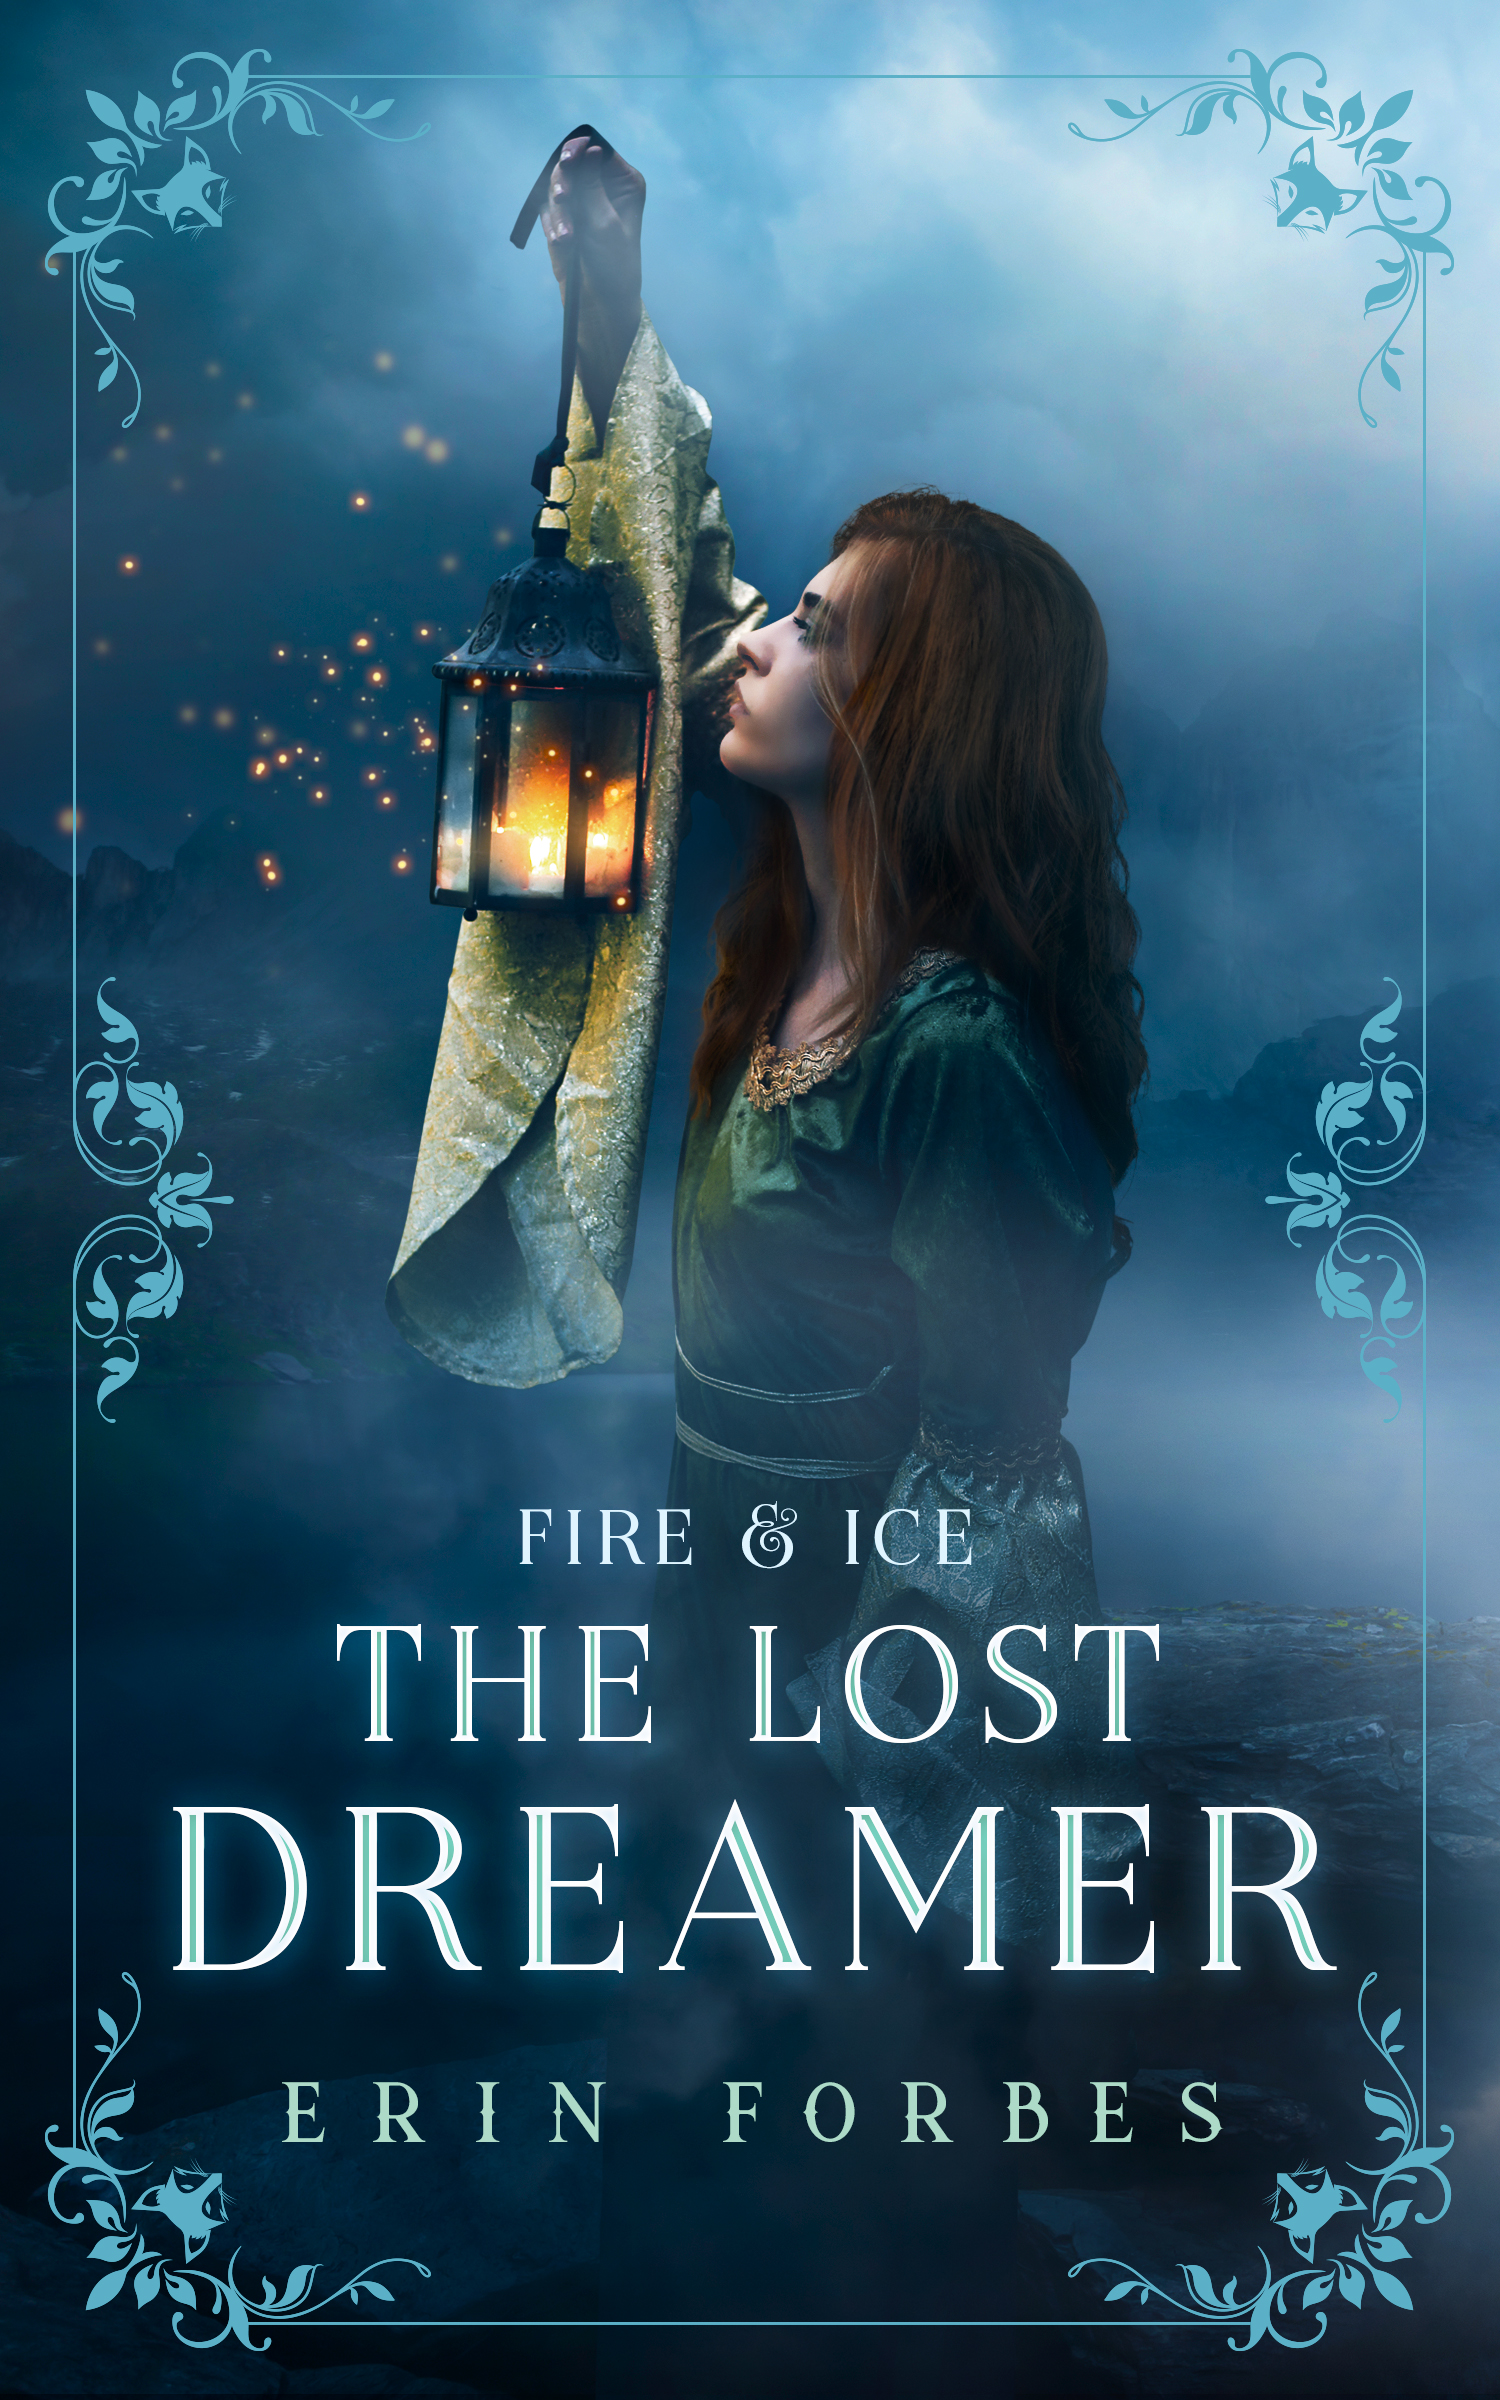 Fire & Ice: The Lost Dreamer